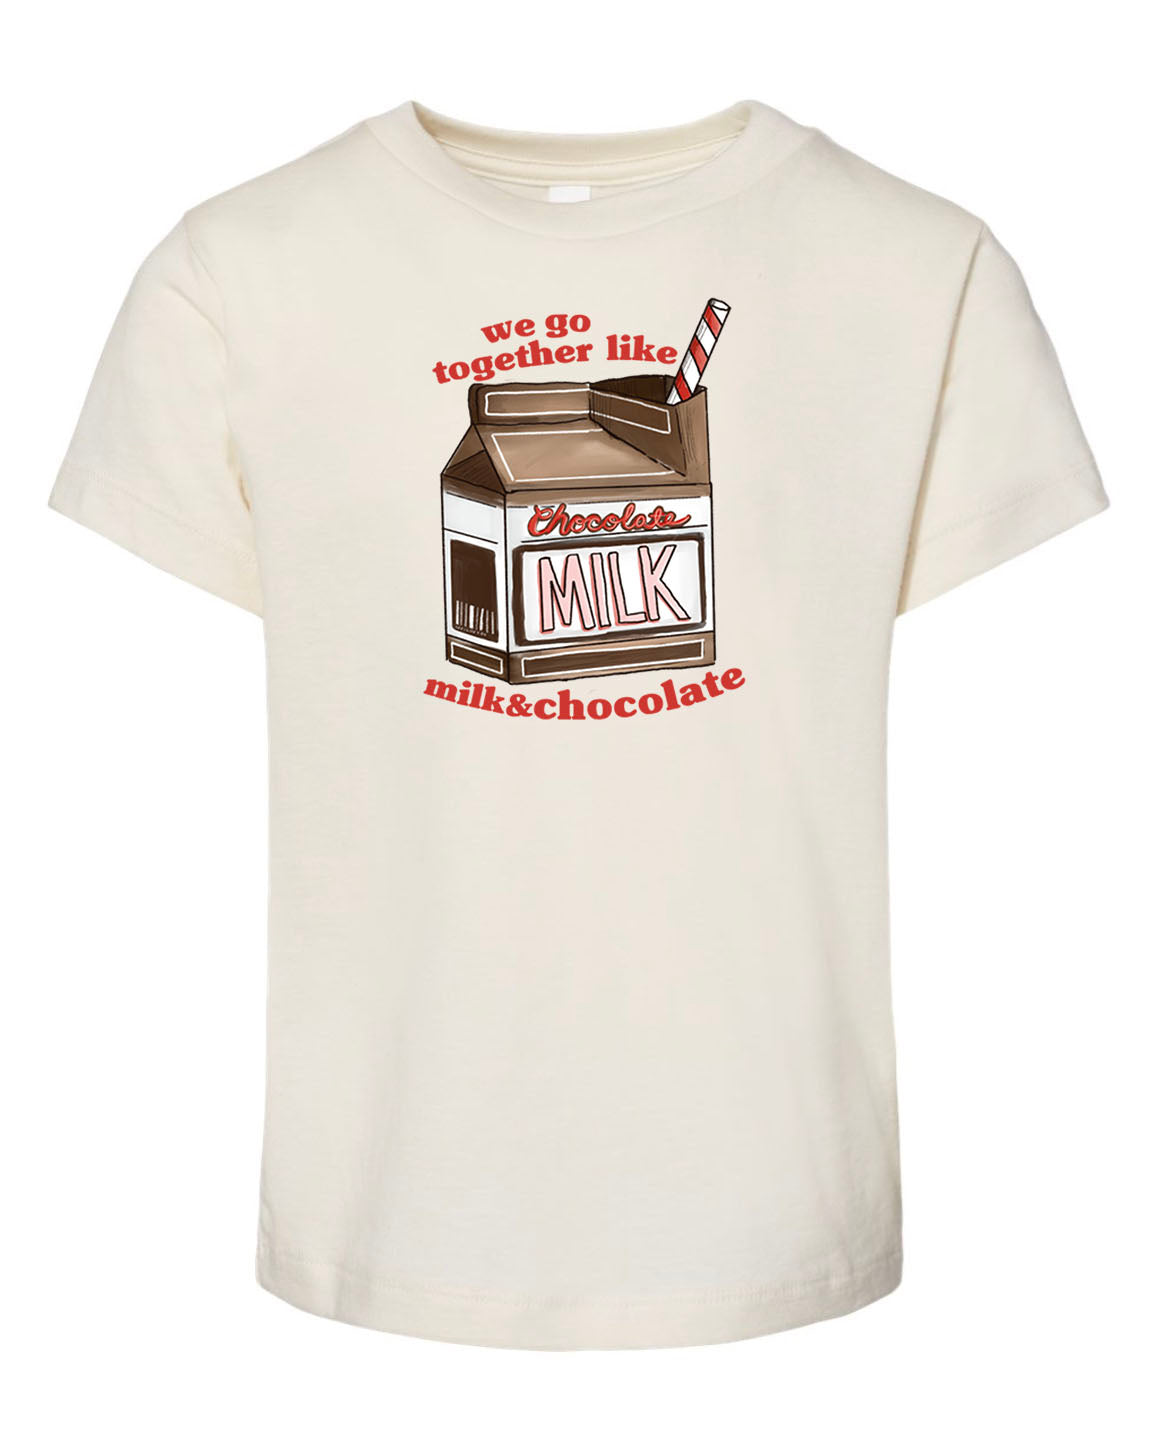 We Go Together Like Milk & Chocolate - Natural [Children's Tee]